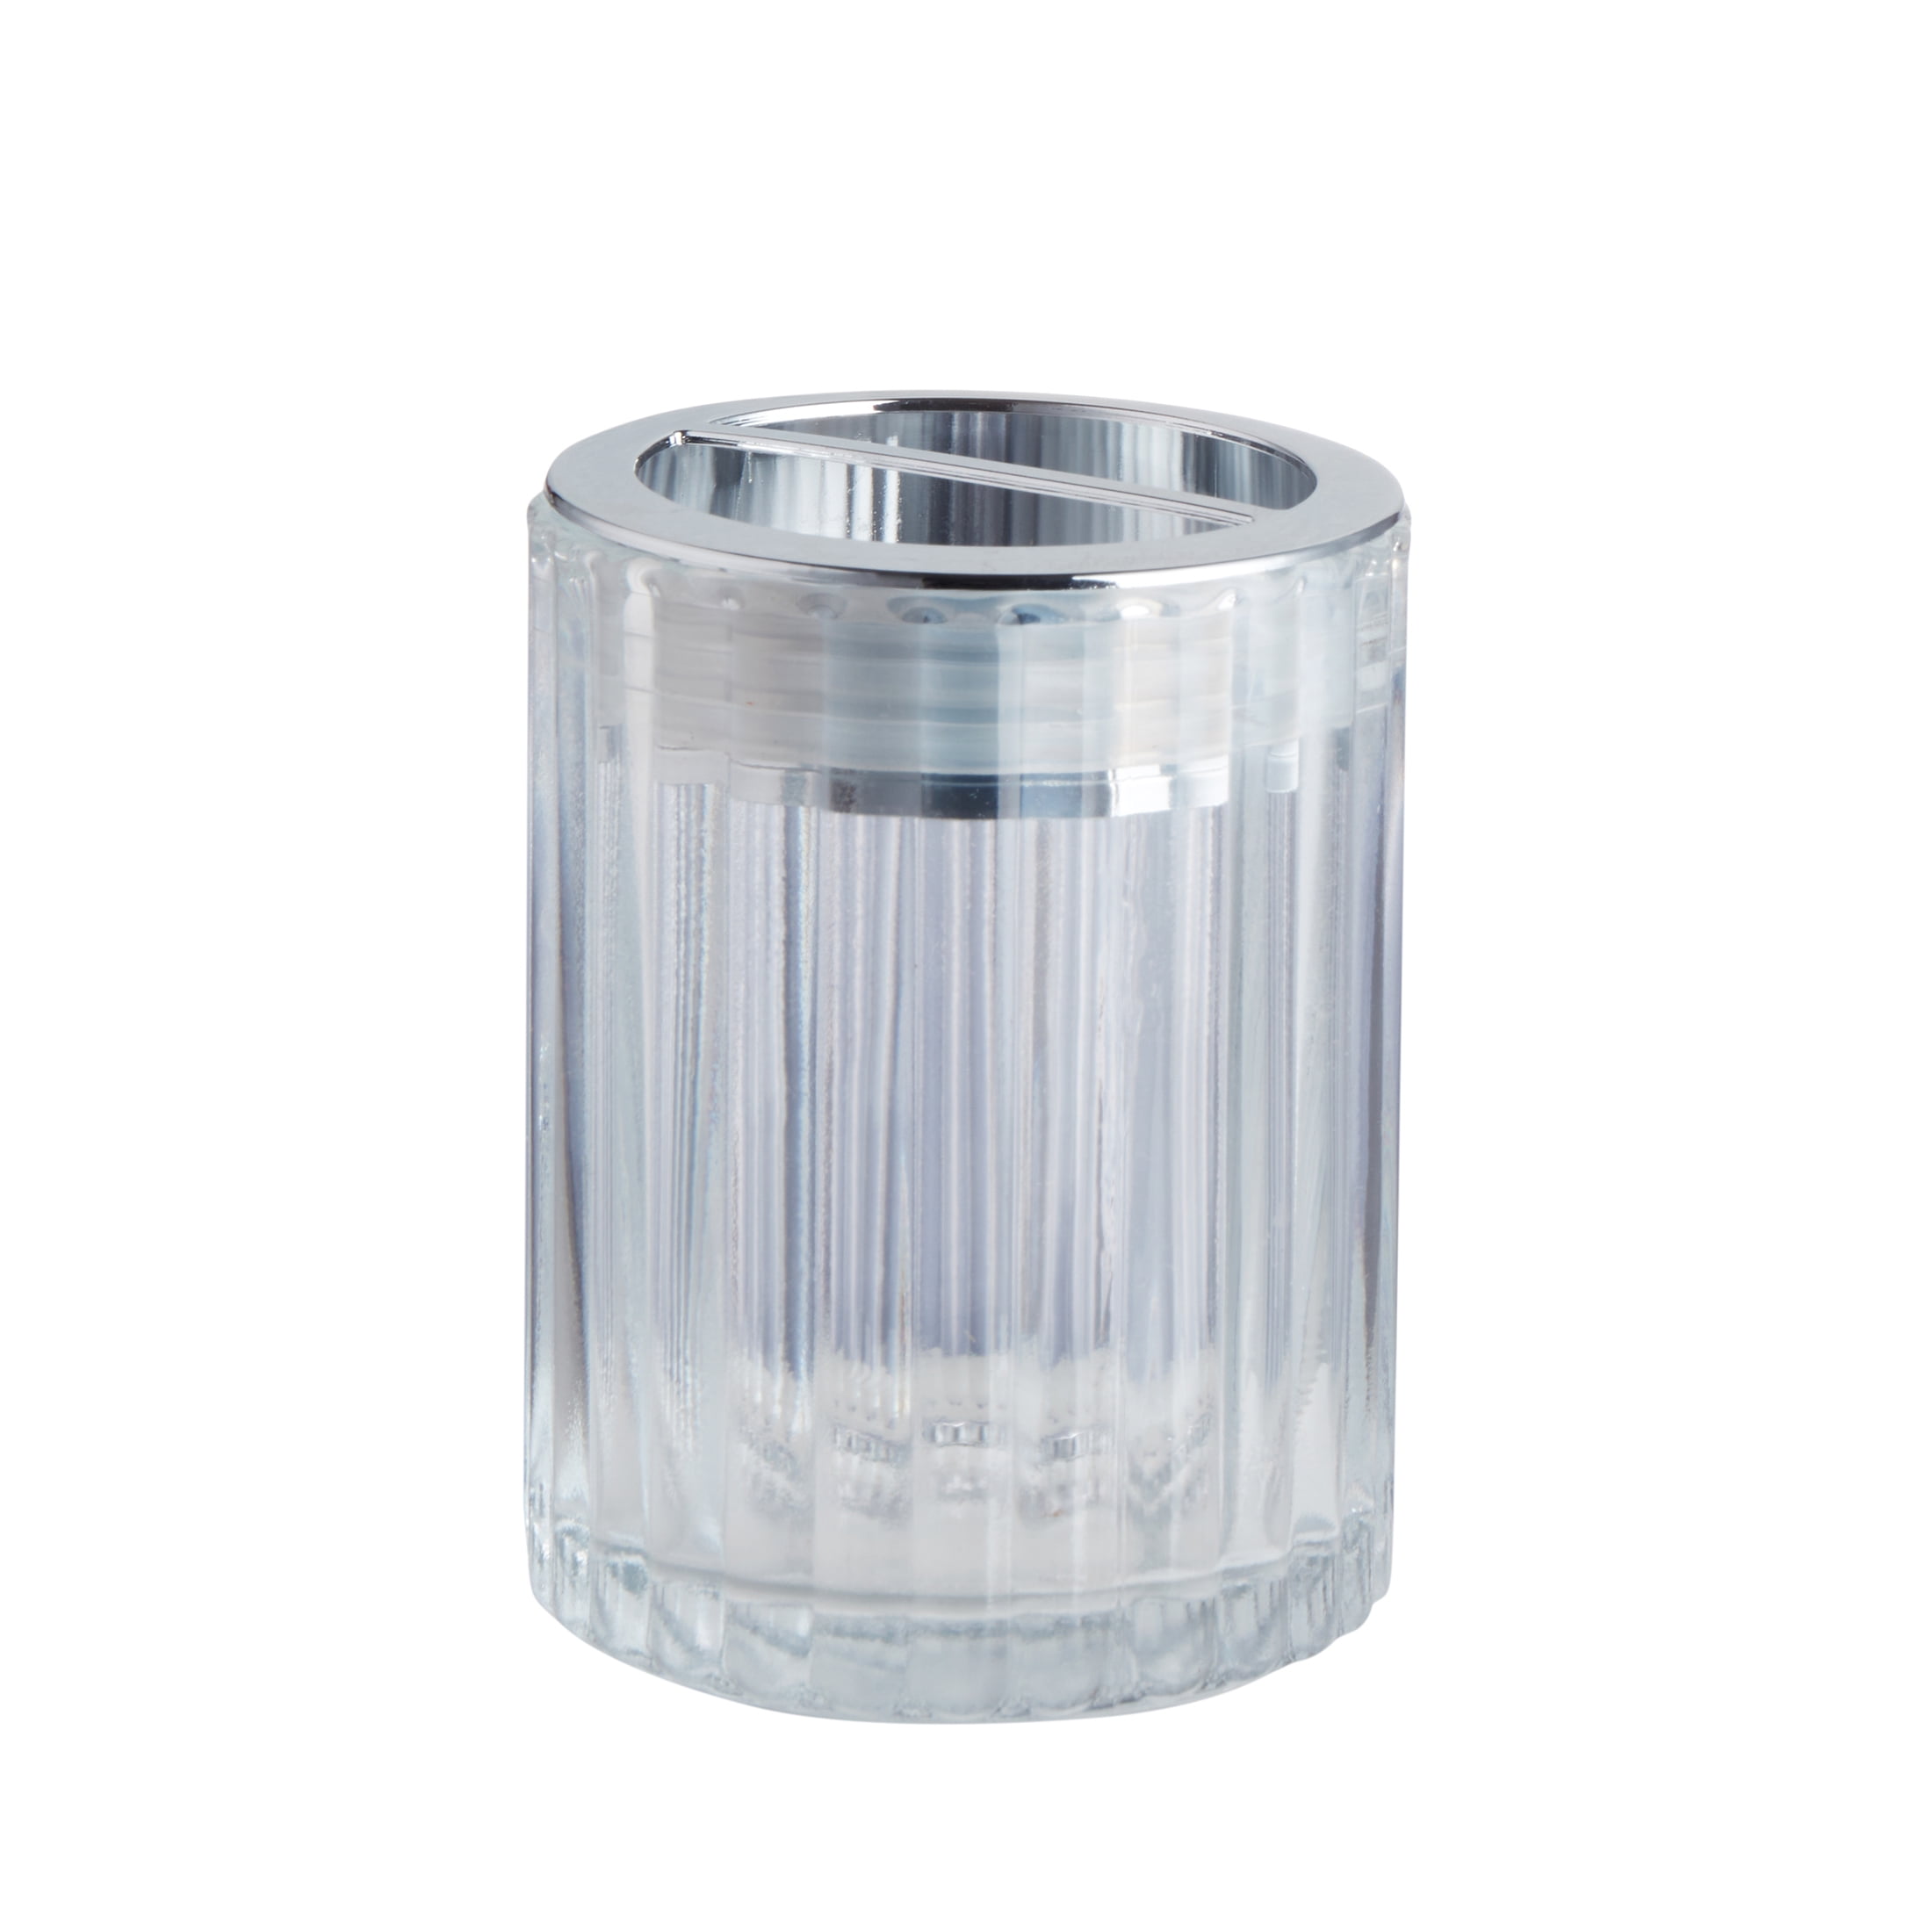 POPULAR BATH SINATRA TUMBLER SILVER RESIN AND CRACKED ICE LOOK 